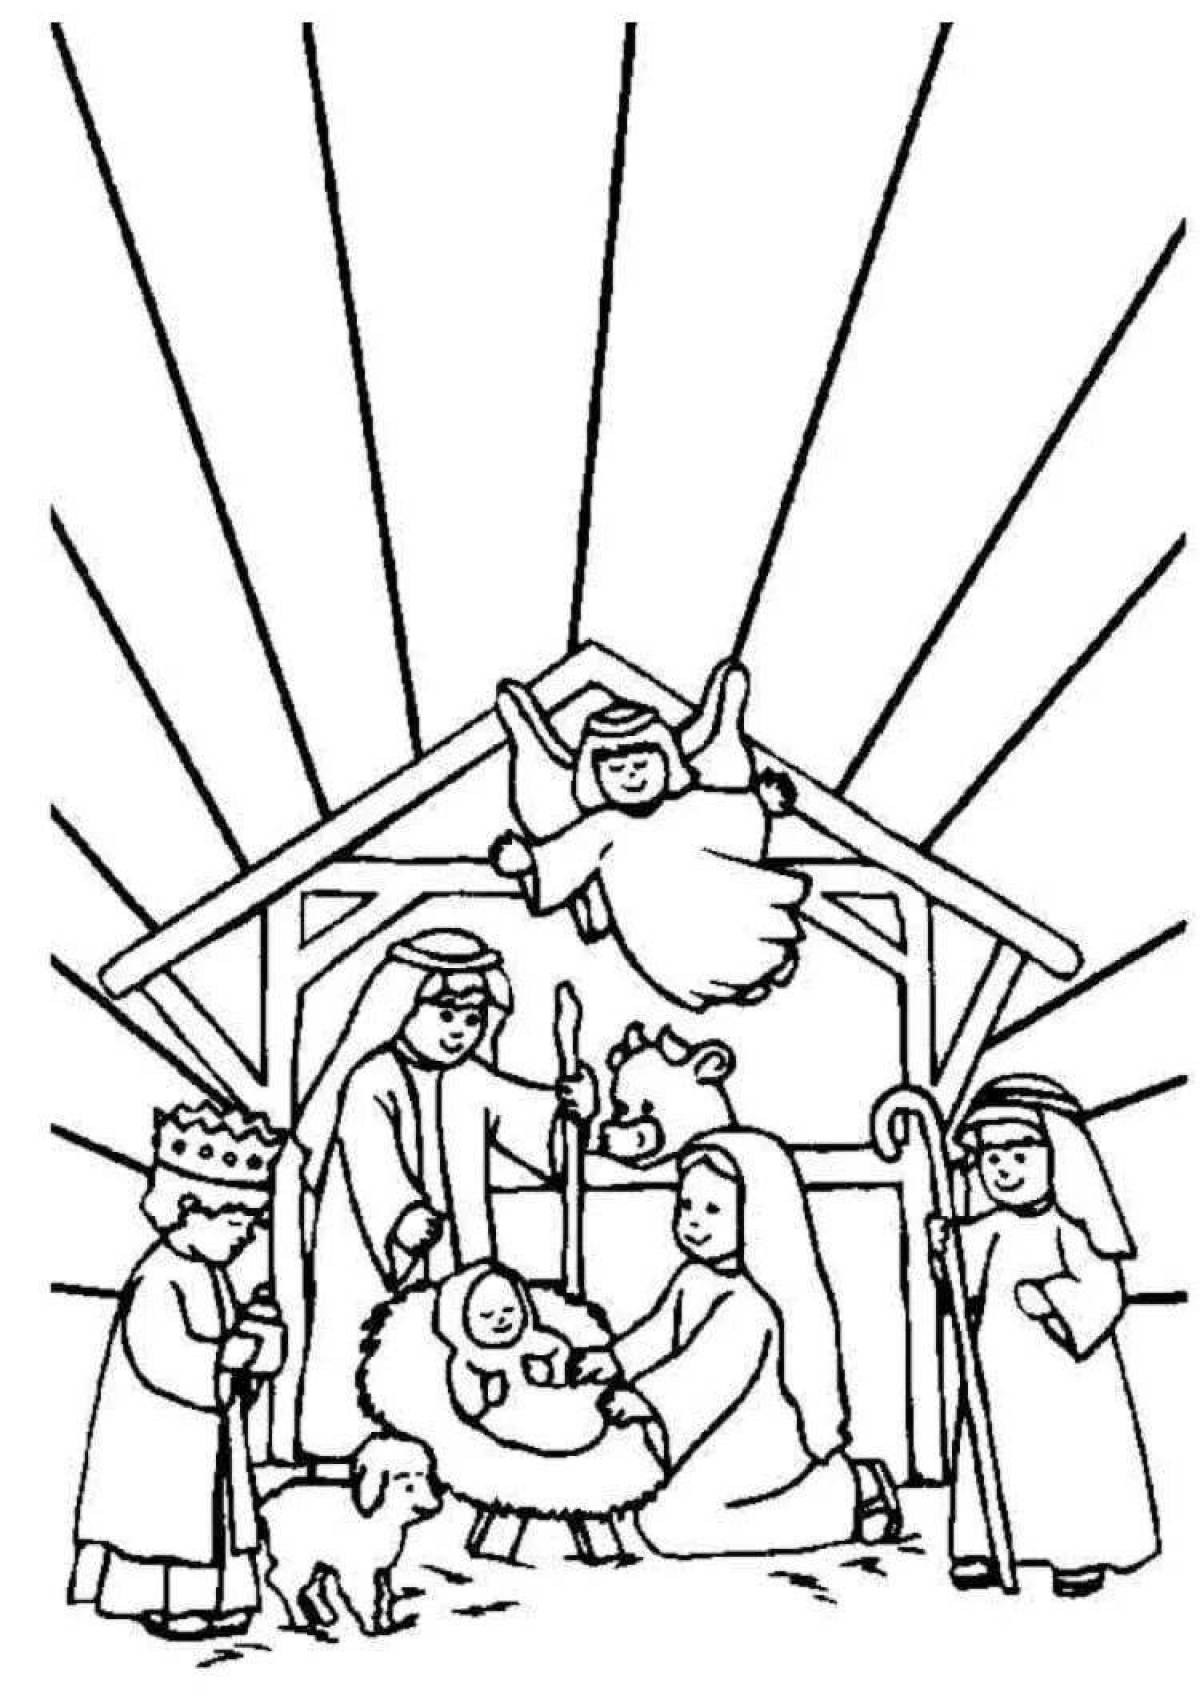 A grand Christmas story coloring book